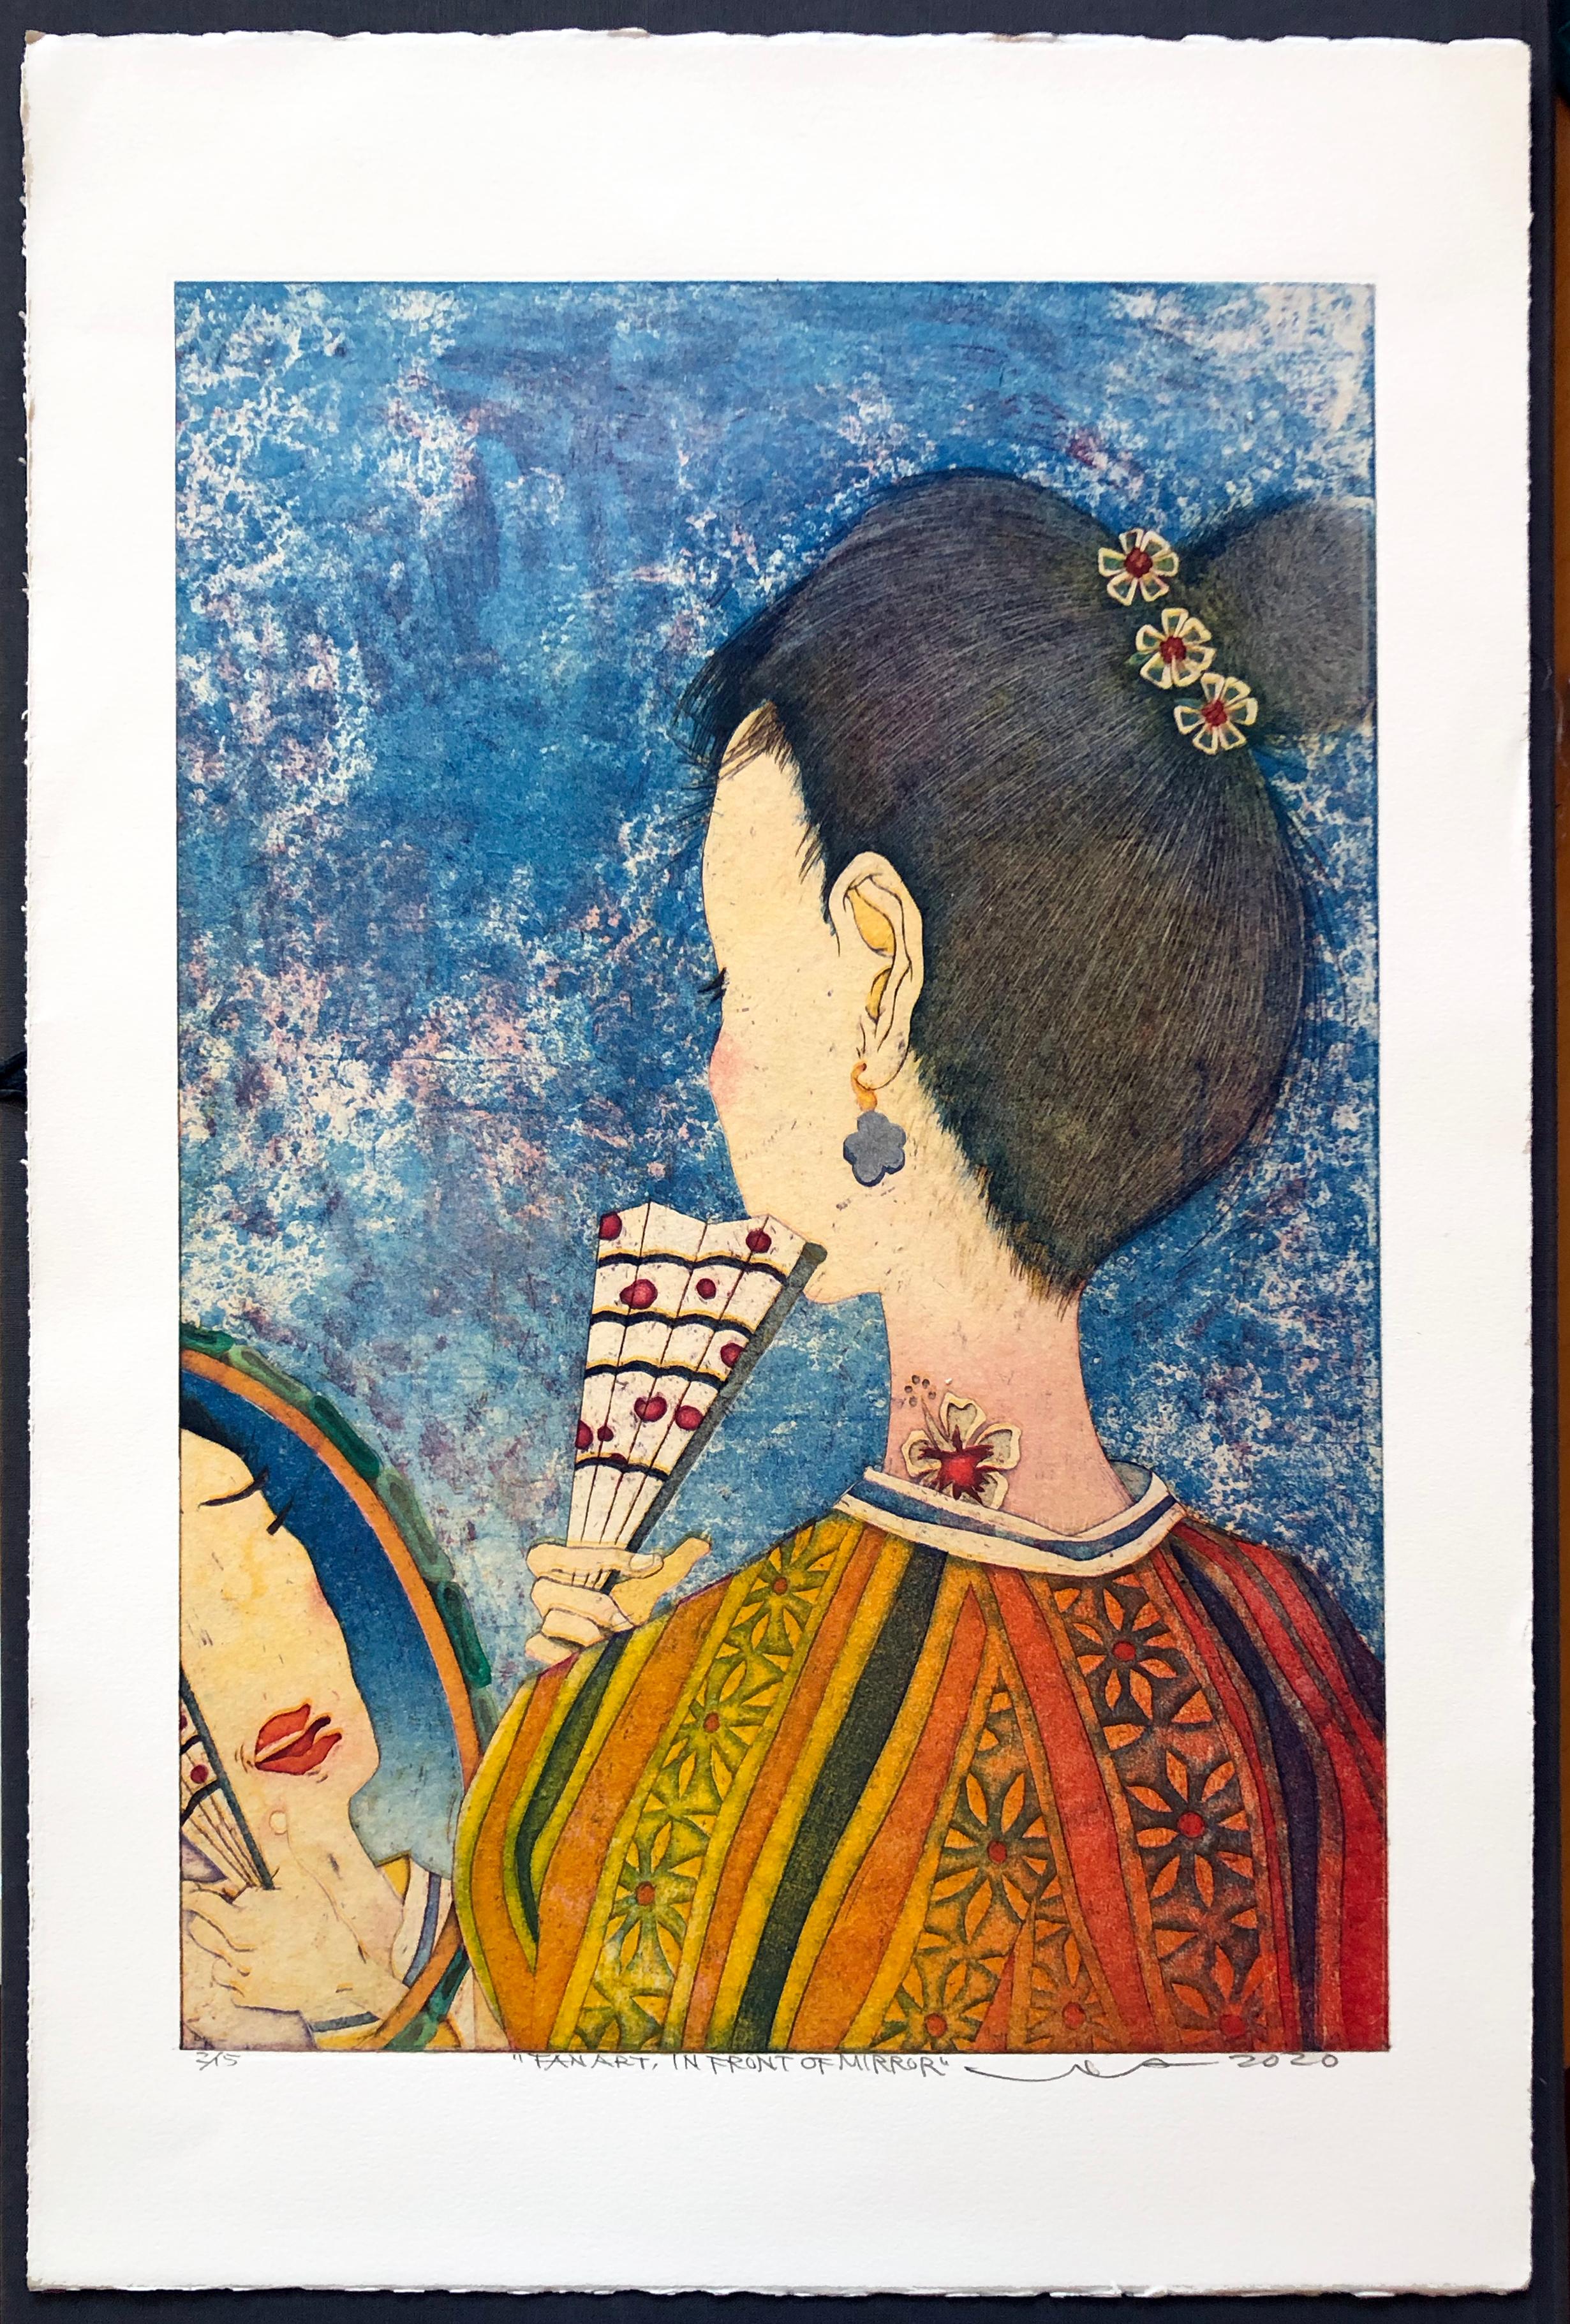 Medium: Intaglio and Chine Colle
Year: 2020
Image Size: 18 x 12 inches
Edition of 15

Signed, titled and numbered by the artist. A young woman with traditional Japanese fan in front of mirror. While the images have some resemblance to traditional